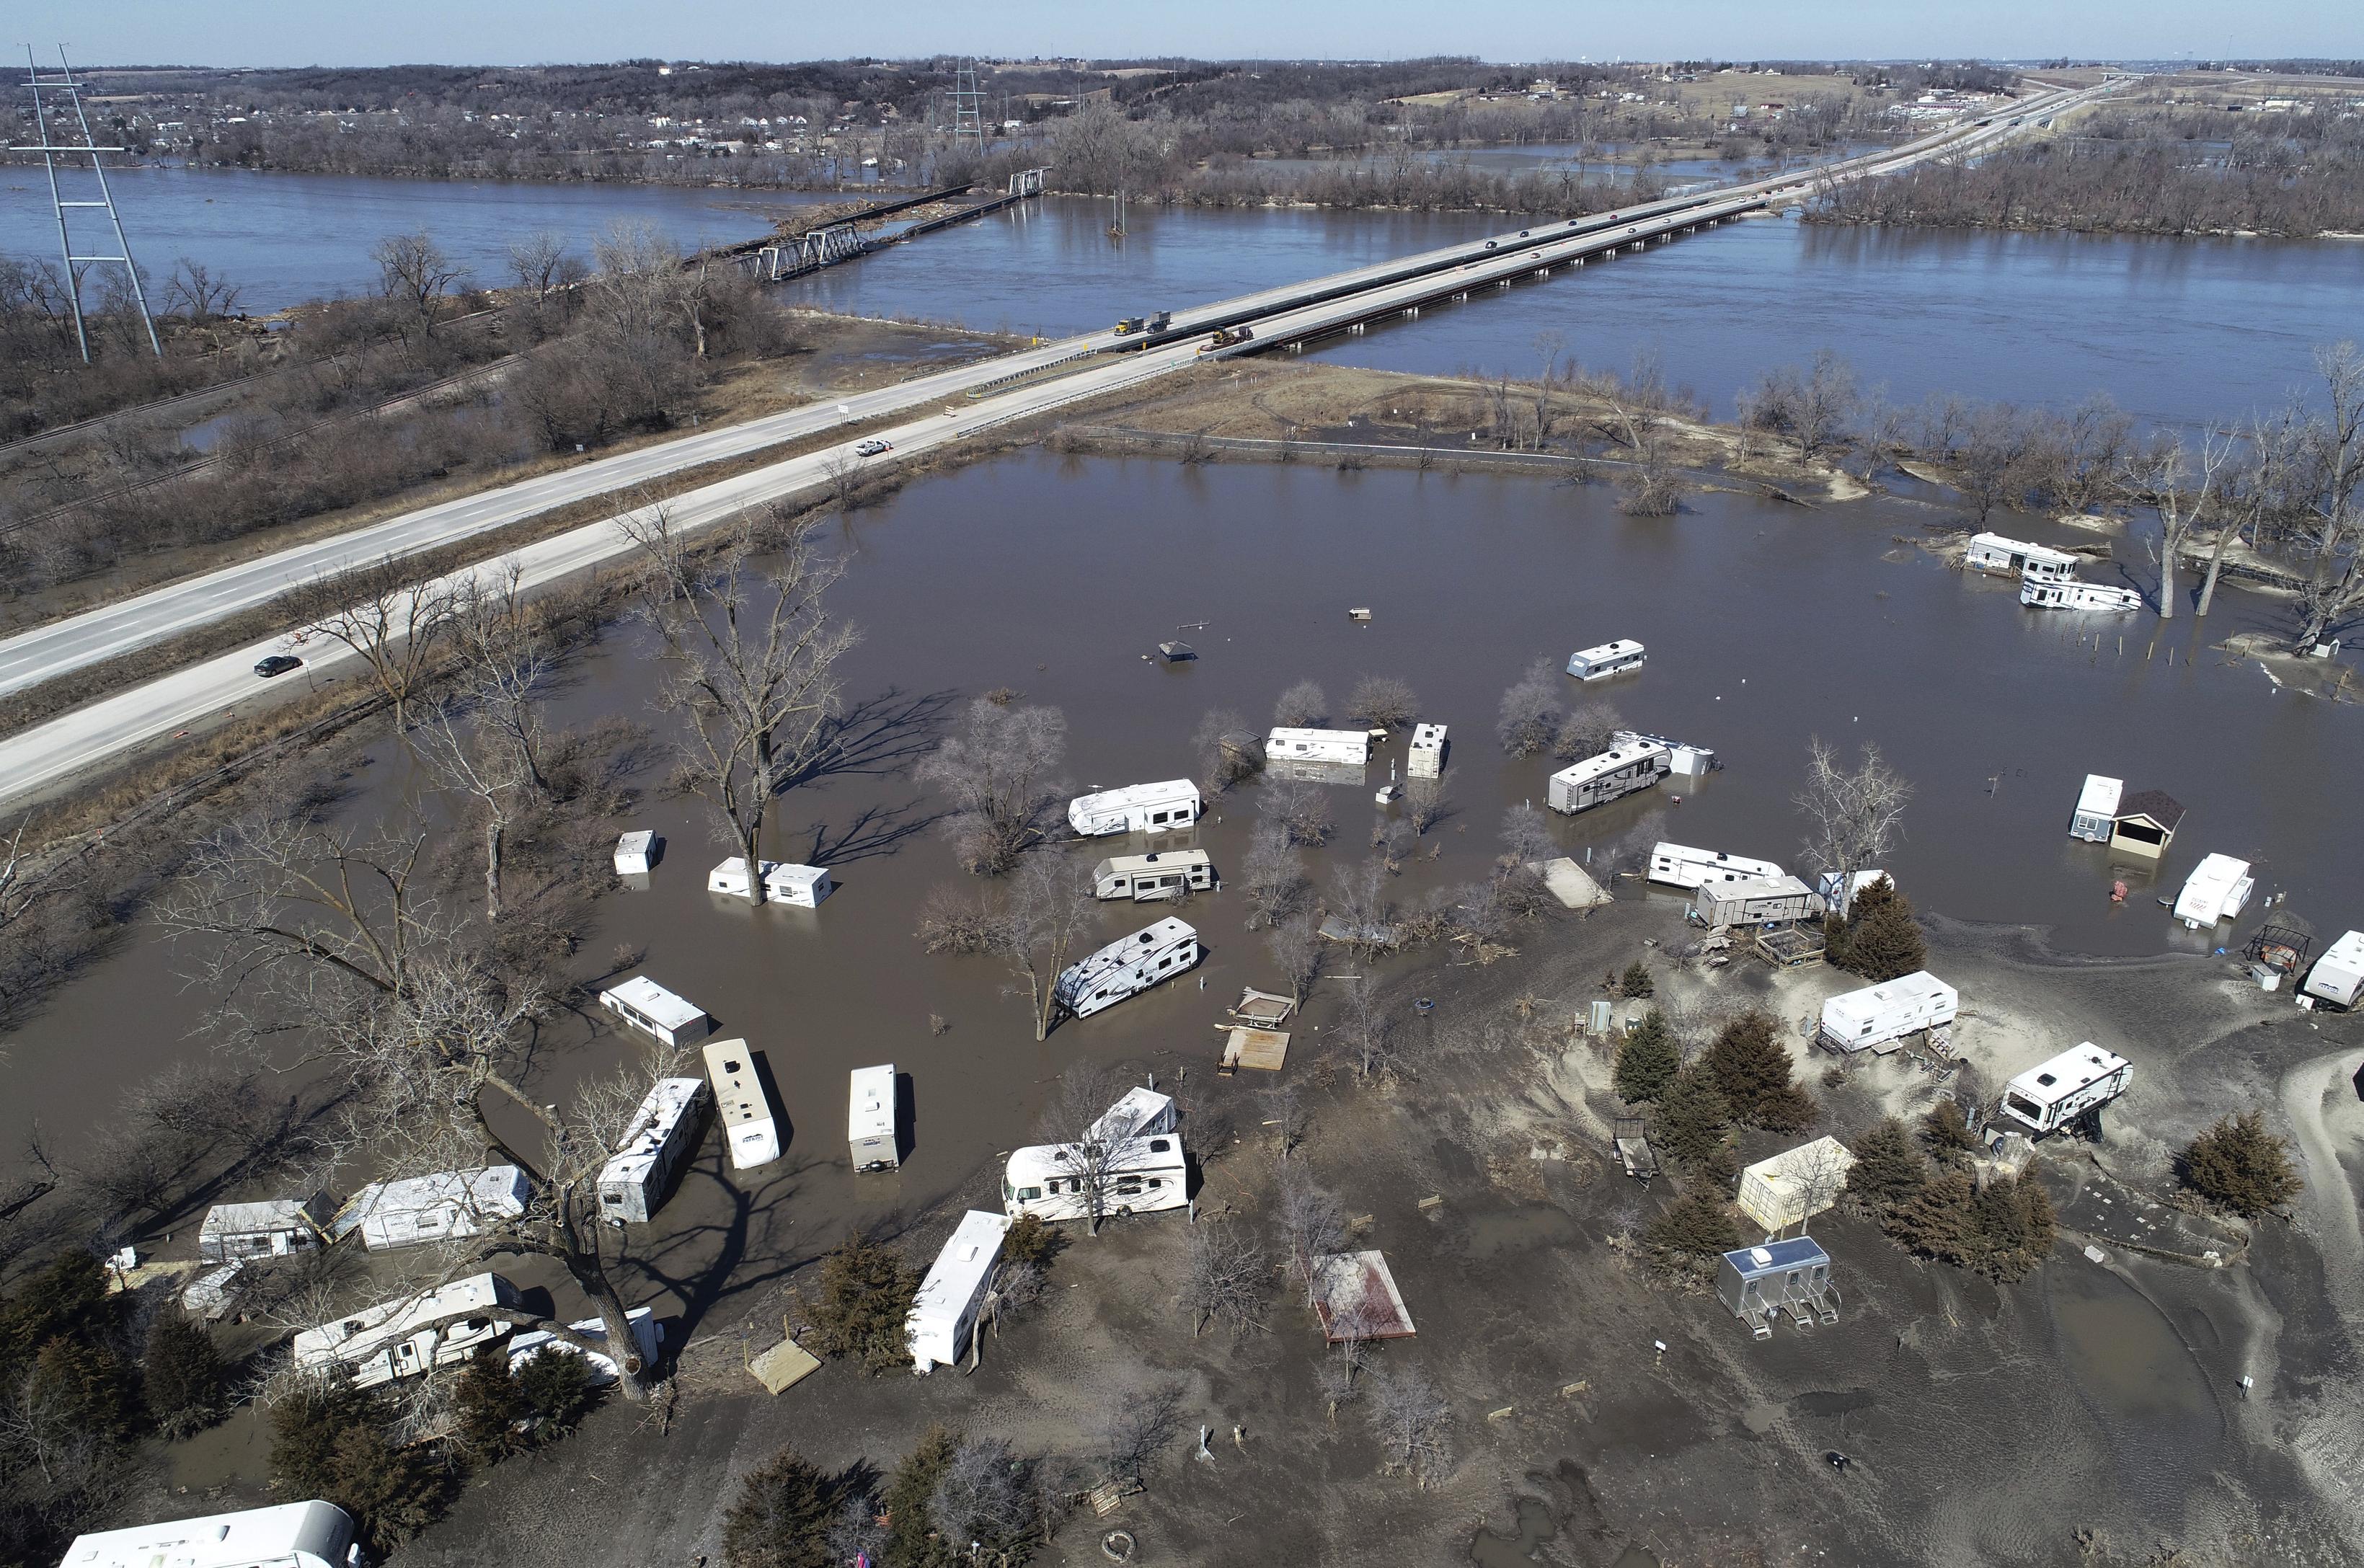 Unprecedented spring flooding possible, US forecasters say The